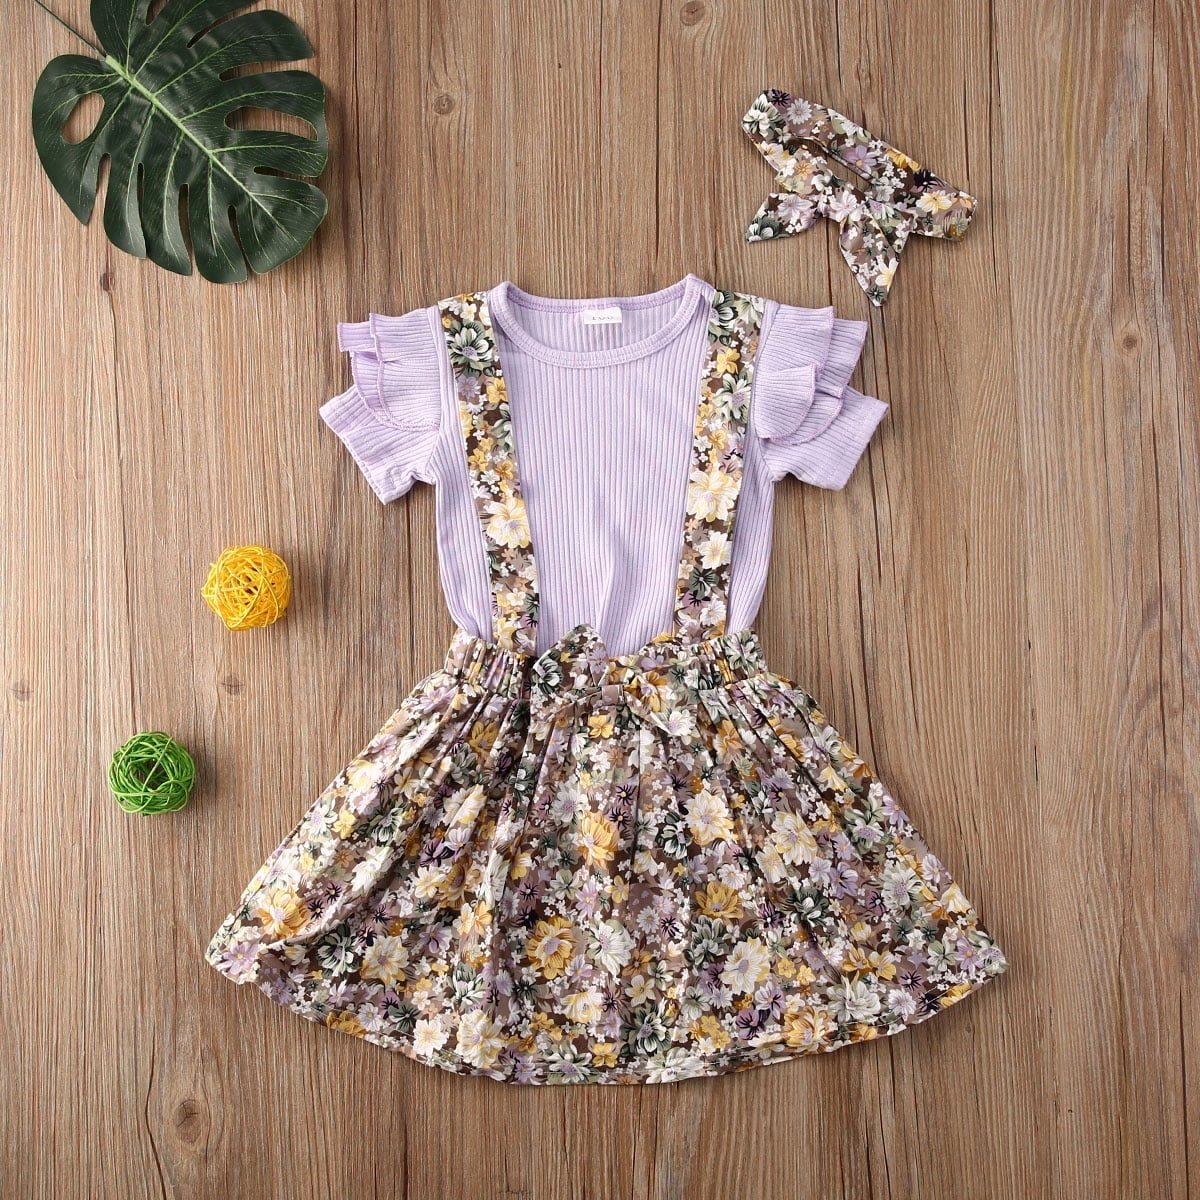 Cute Baby Girls Outfit Set Short Sleeve Ruffle Solid Color Classical Round Neck Loose Top Shirt Floral Pattern Bow Suspender Short Skirt Bow Hair Band Set Walmart Canada